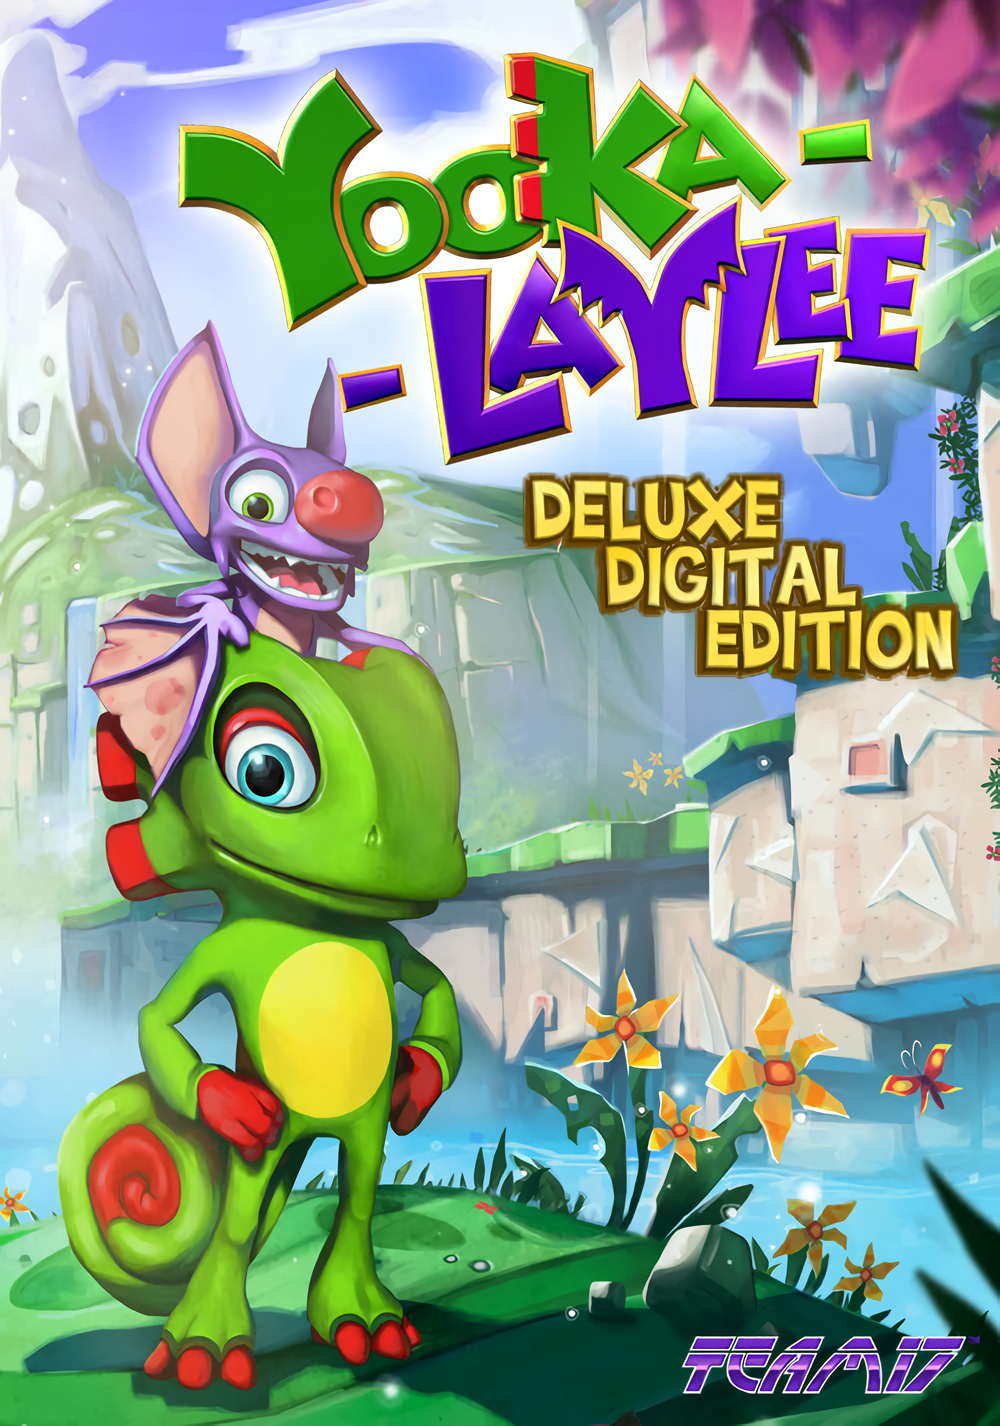 Yooka-Laylee. Deluxe Edition [PC, Цифровая версия] (Цифровая версия)